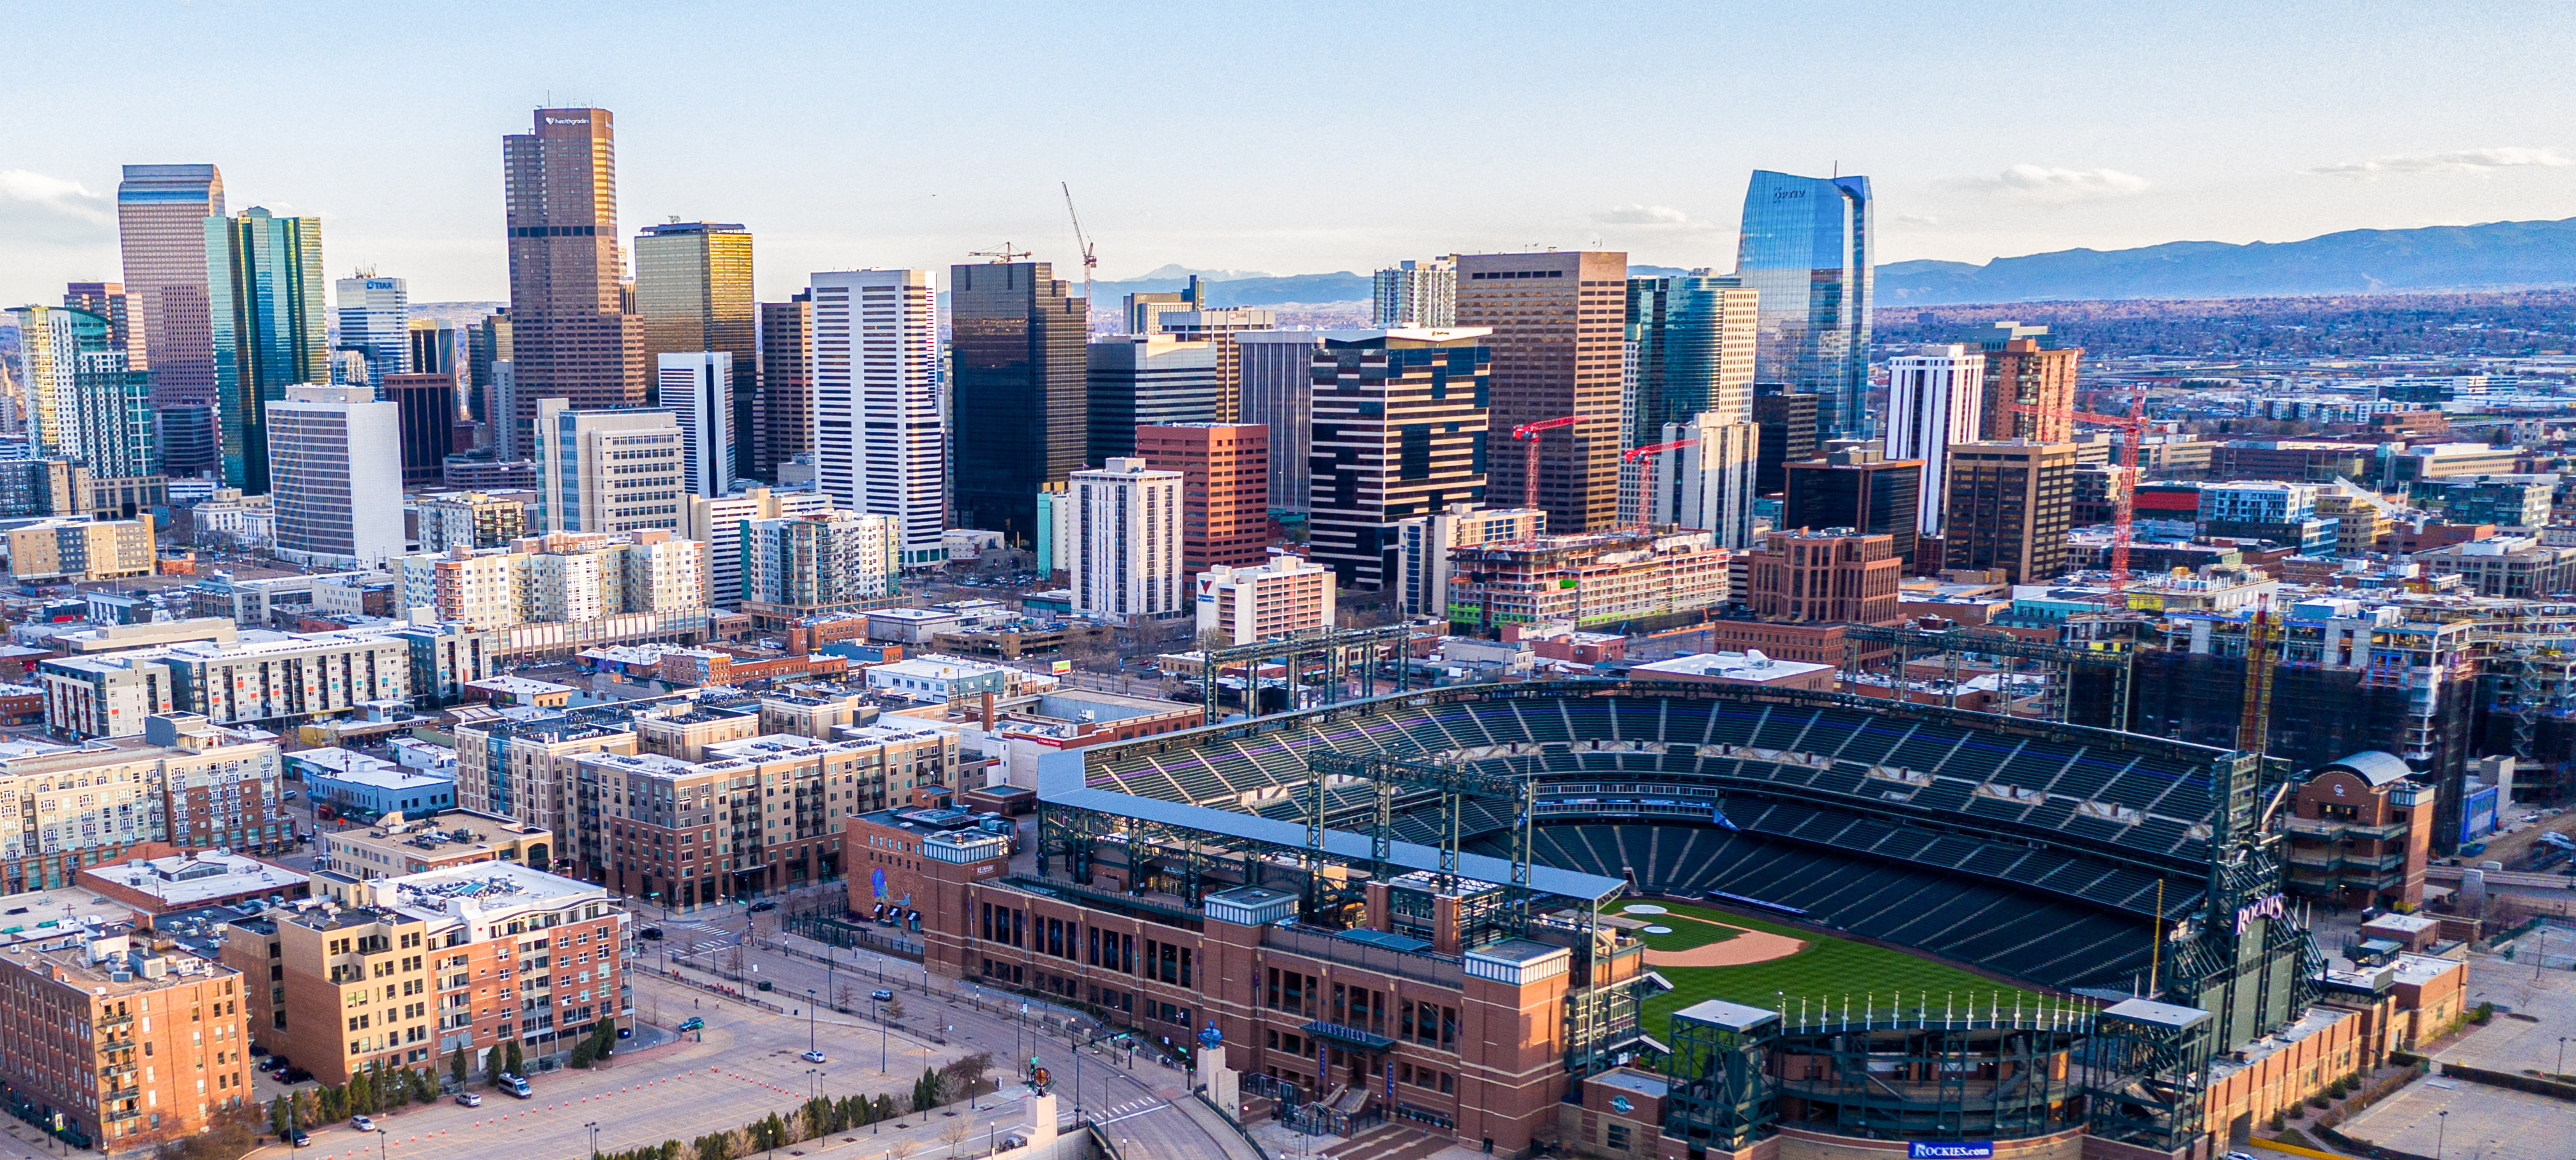 Denver skyline and Coors Field